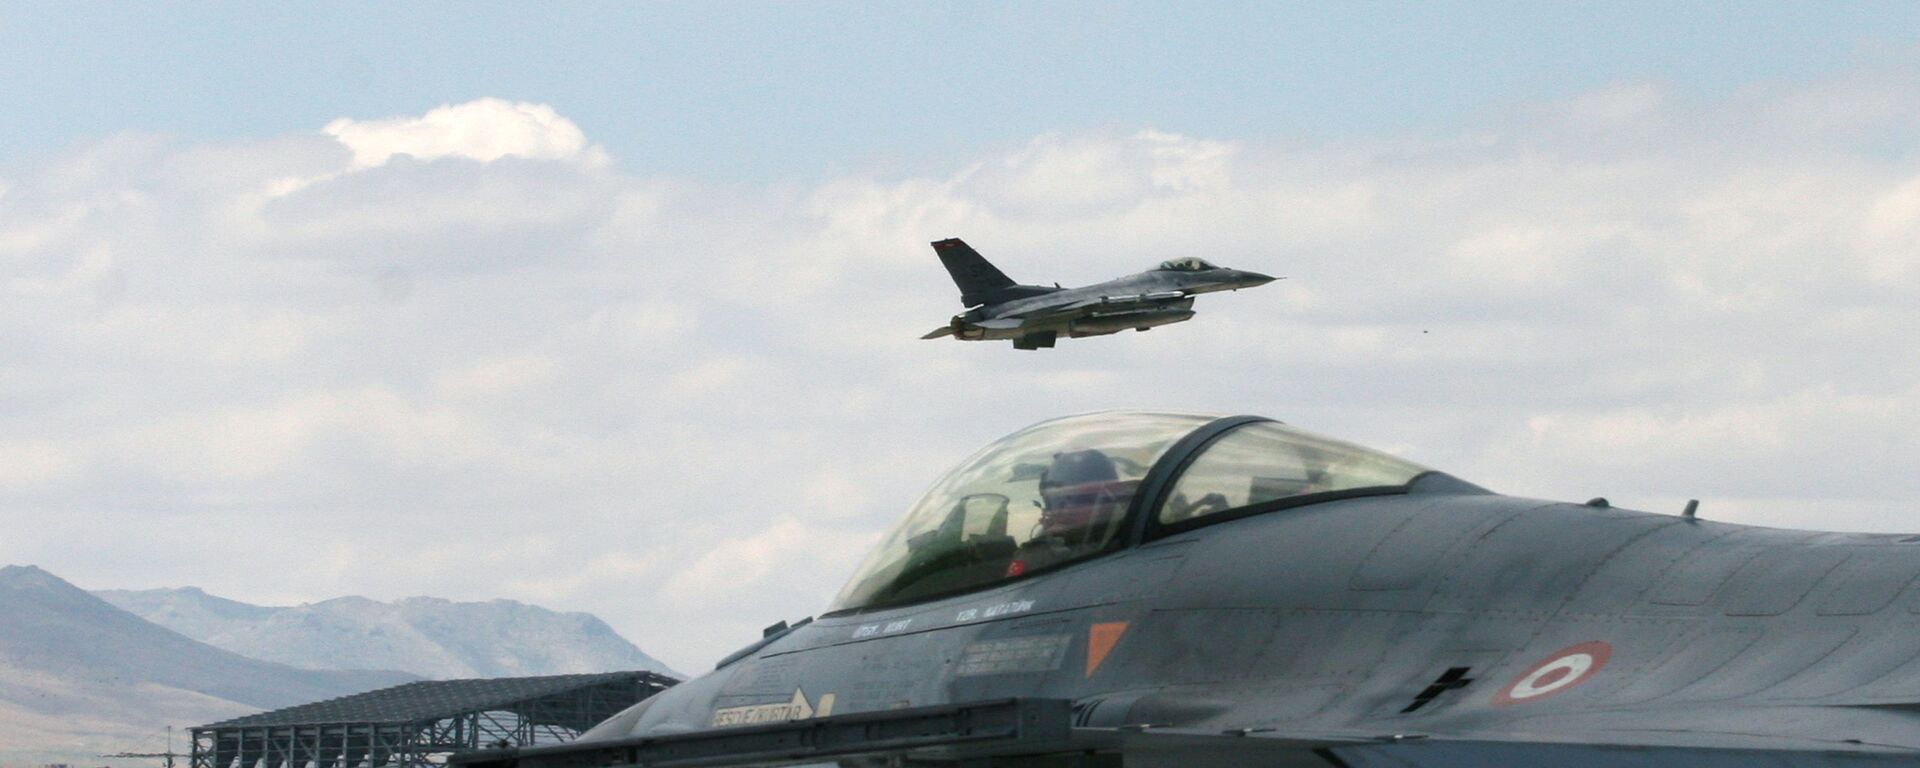 A Turkish F-16 prepares to taxi while another one takes off during Anatolian Eagle exercise at 3rd Main Jet Air Base near the central Anatolian city of Konya, Turkey, Monday, June 15, 2009 - Sputnik International, 1920, 14.09.2022